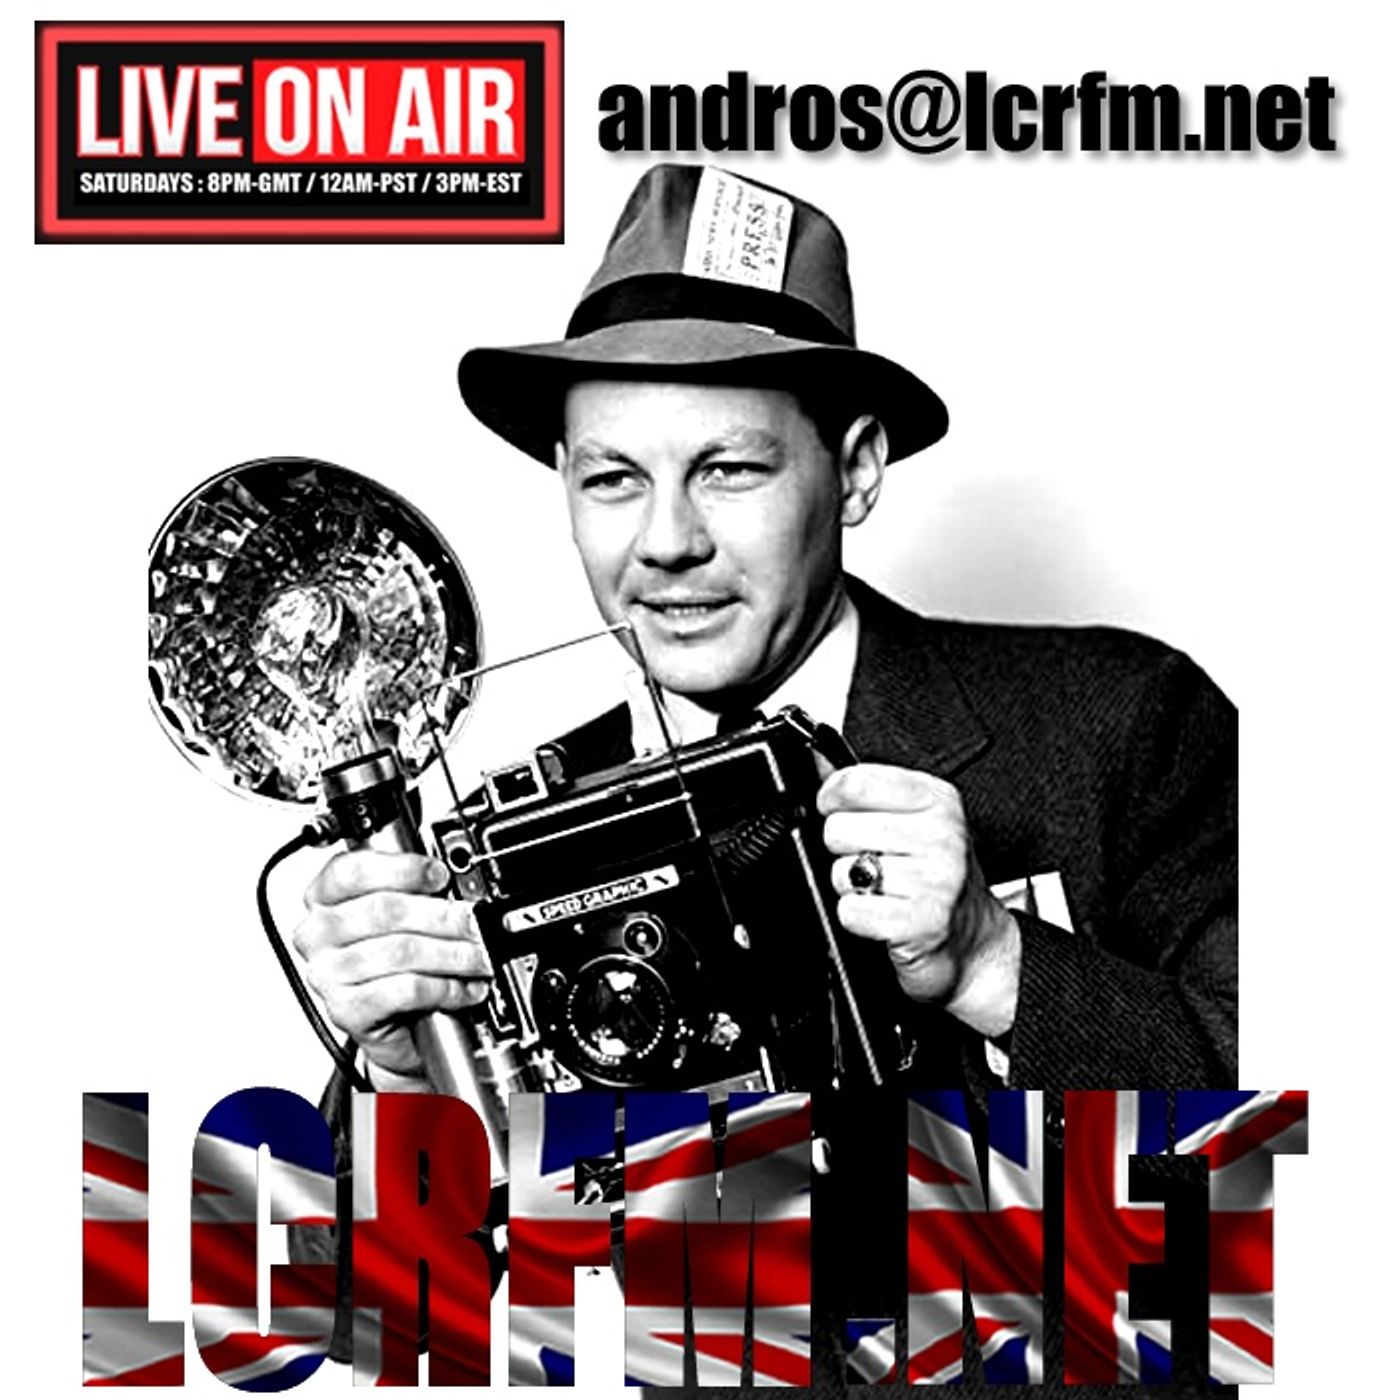 "You Like me Now” Saturday NOVEMBER 19TH … on LCRFM …LIVE FROM LONDON" LCRFM